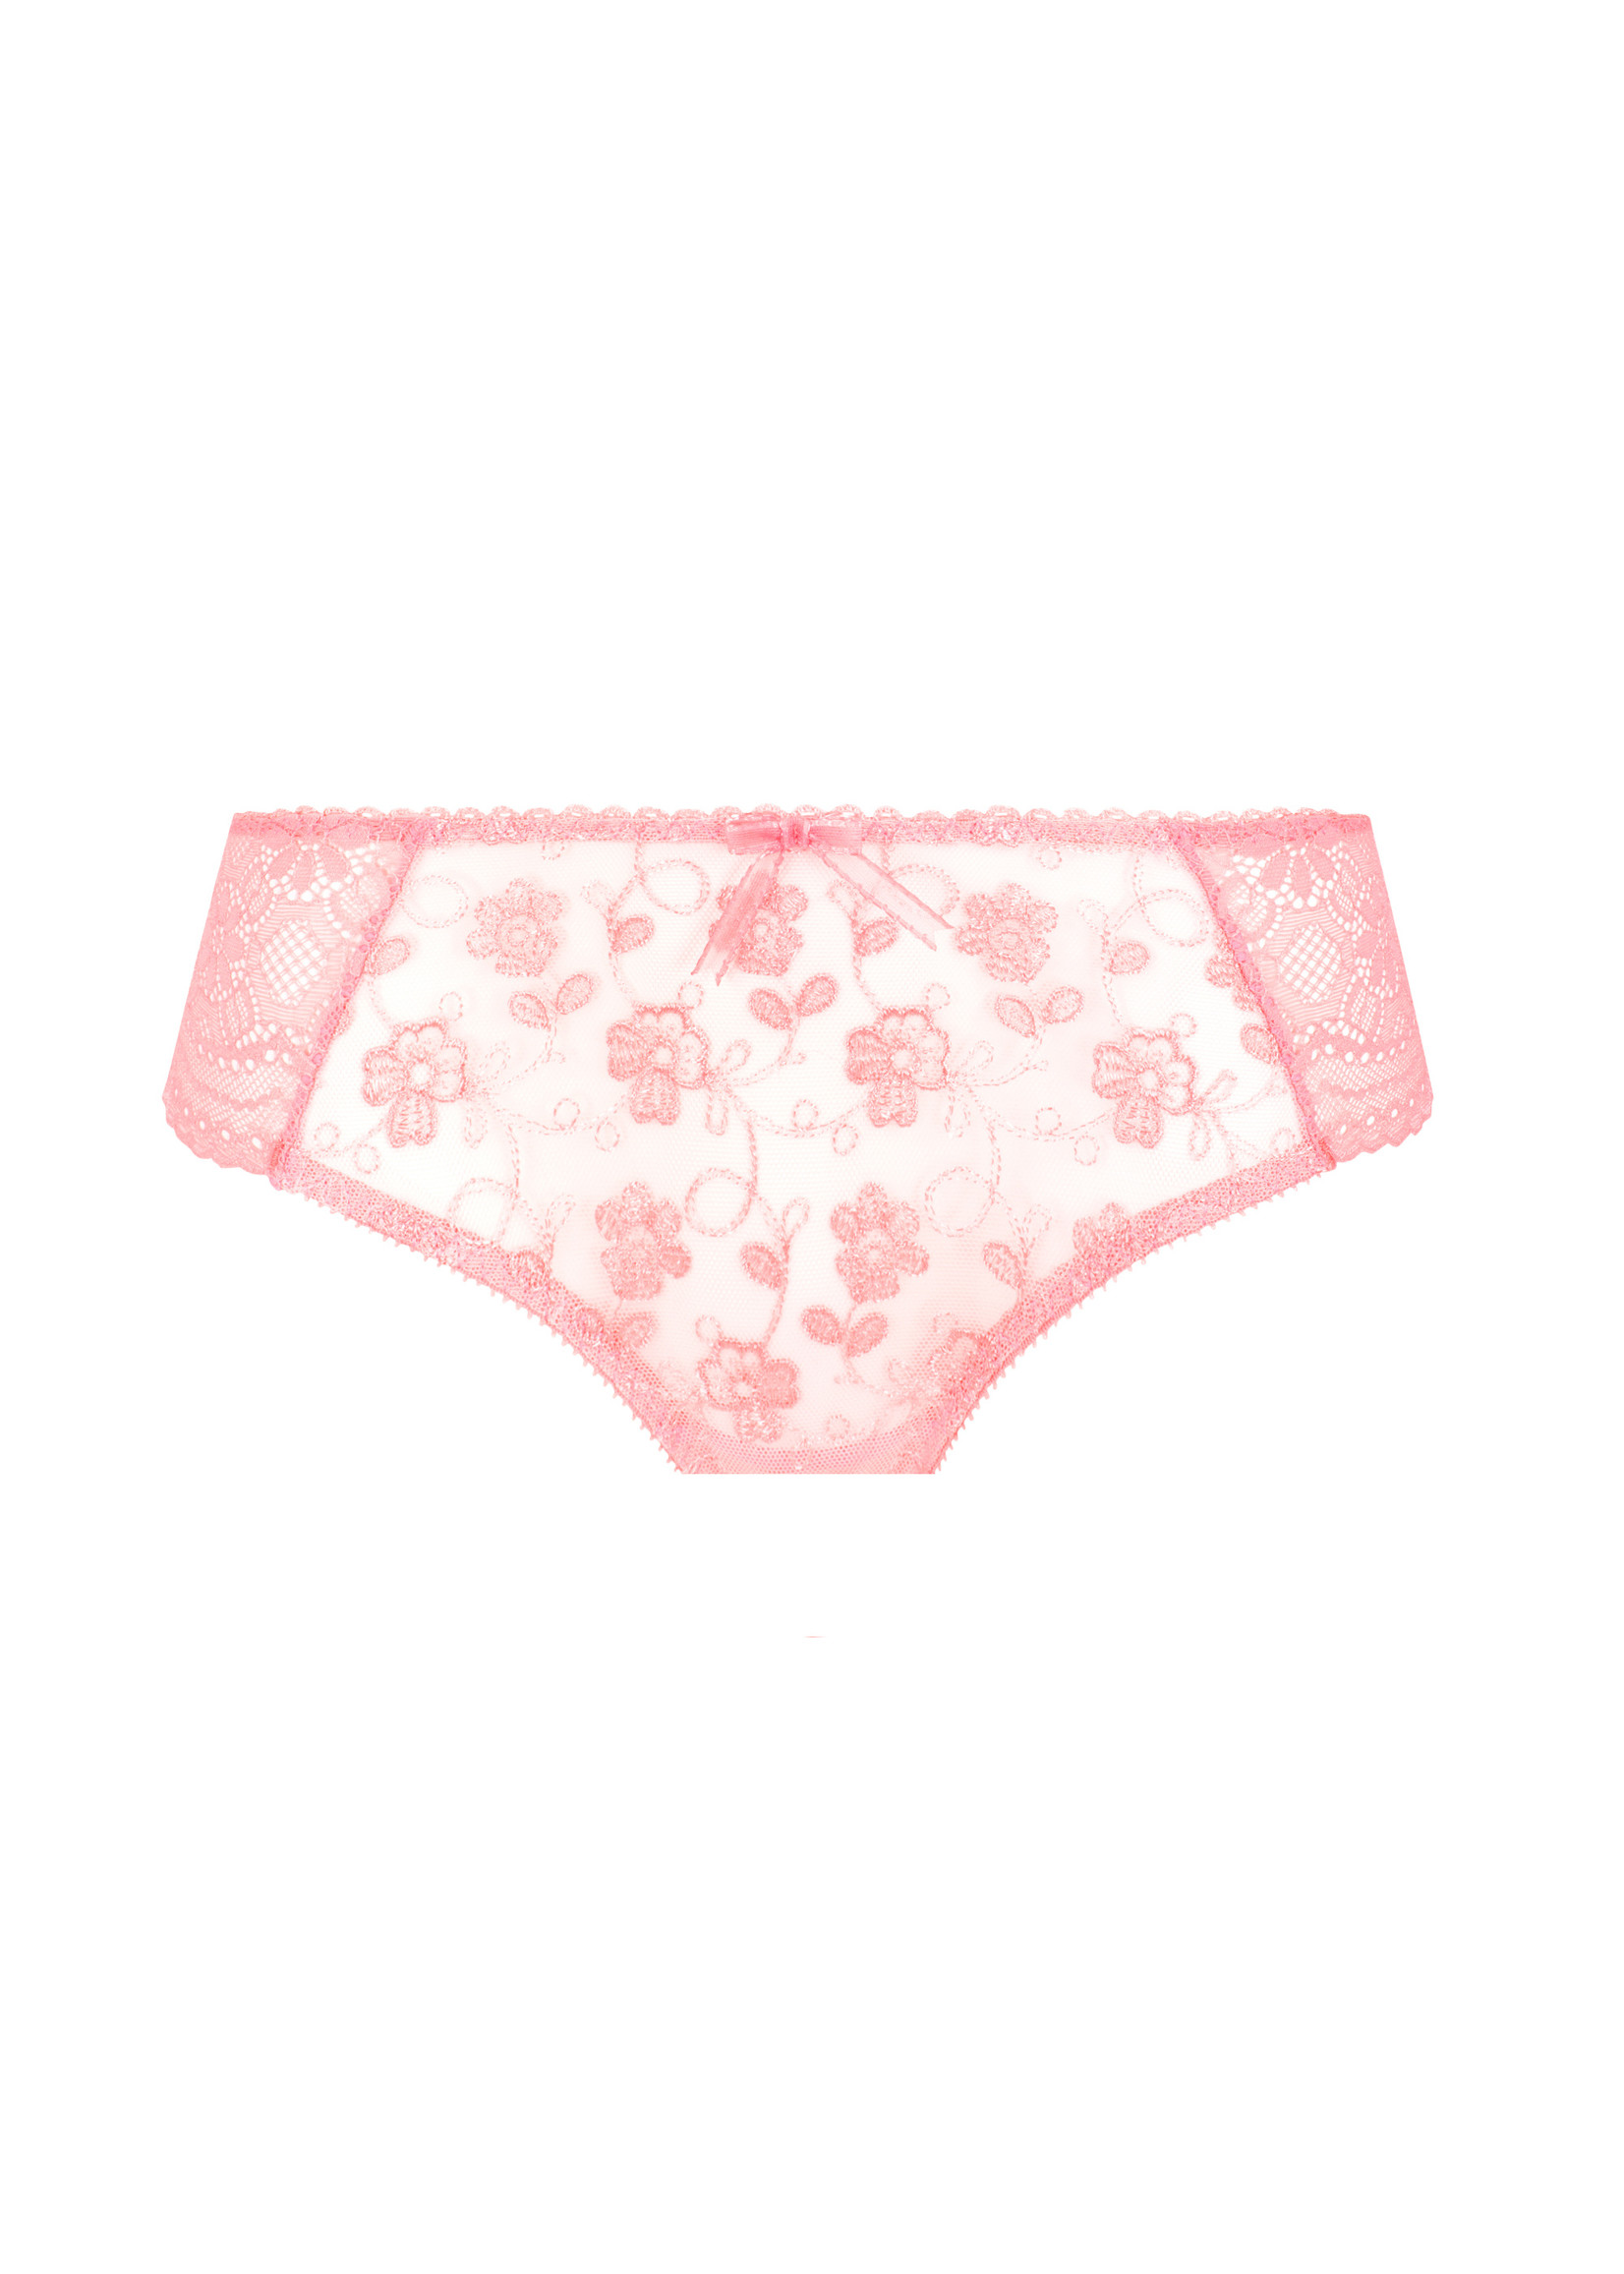 French knickers with floral lace